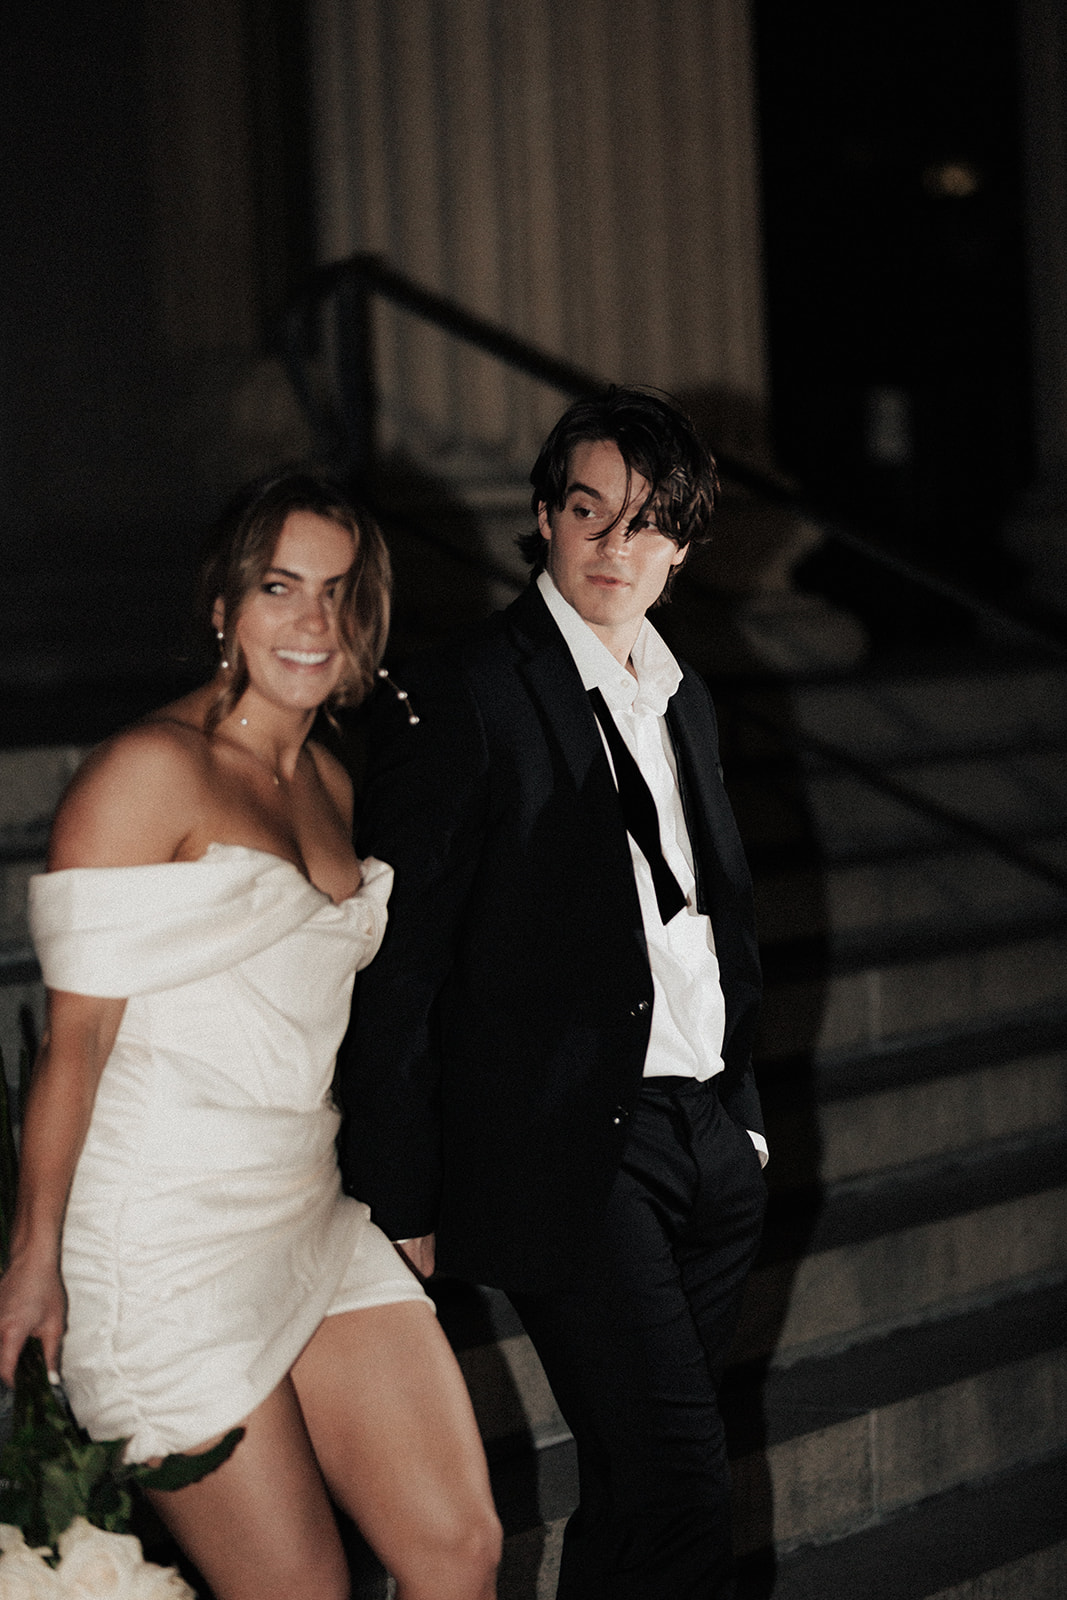 Couple walking. Woman in white dress holding on to bundle of roses. Man with bow tie untied and hair in his face. Both looking towards the camera for Charleston engagament session